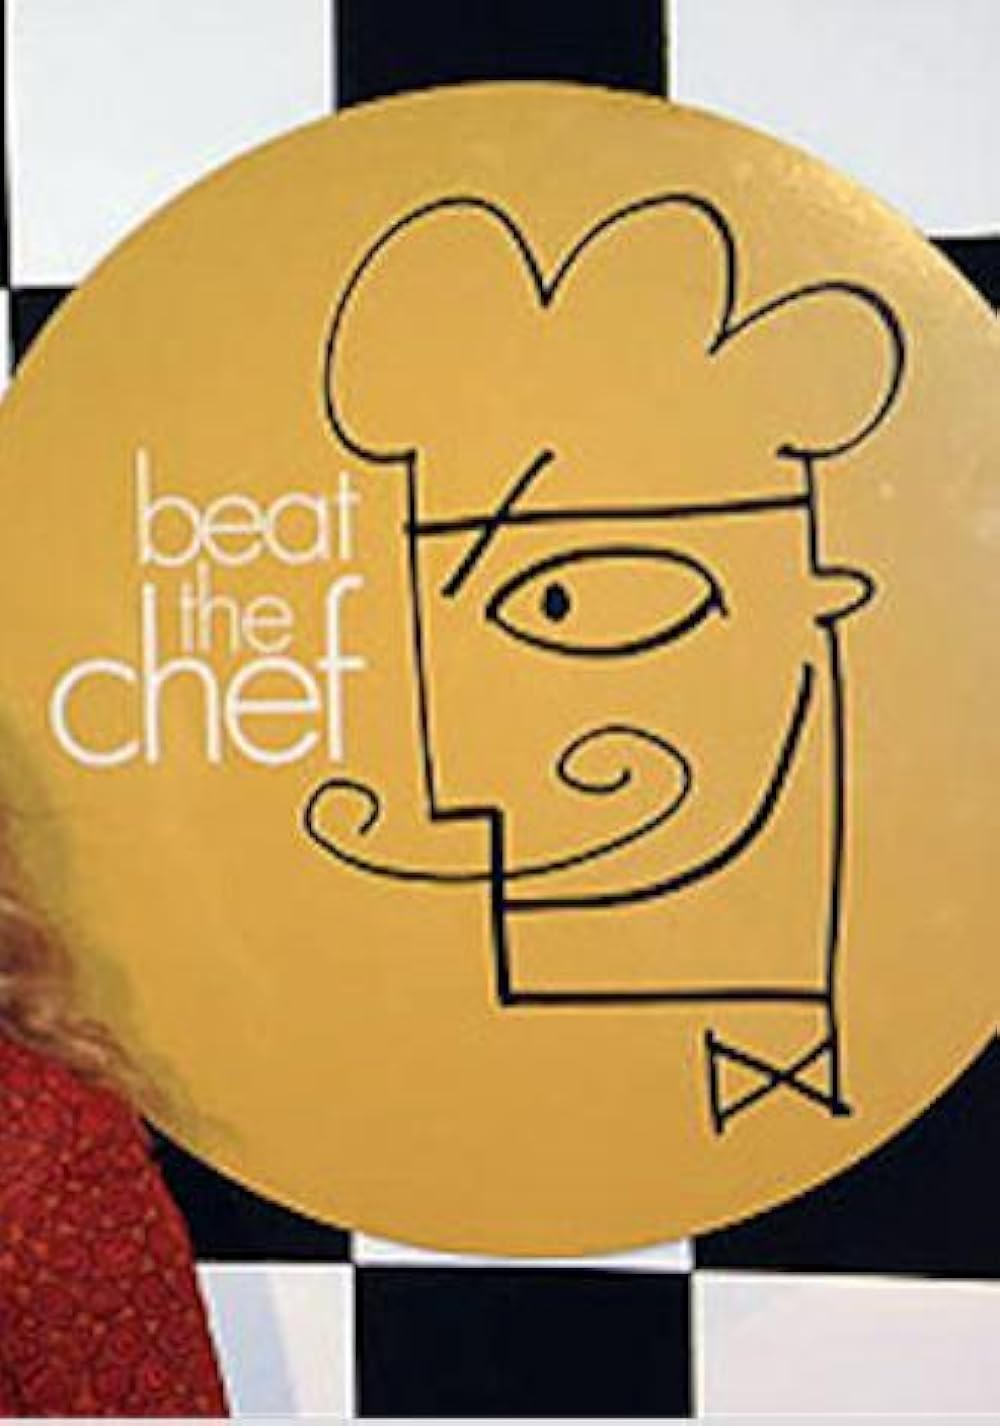 Beat the Chef